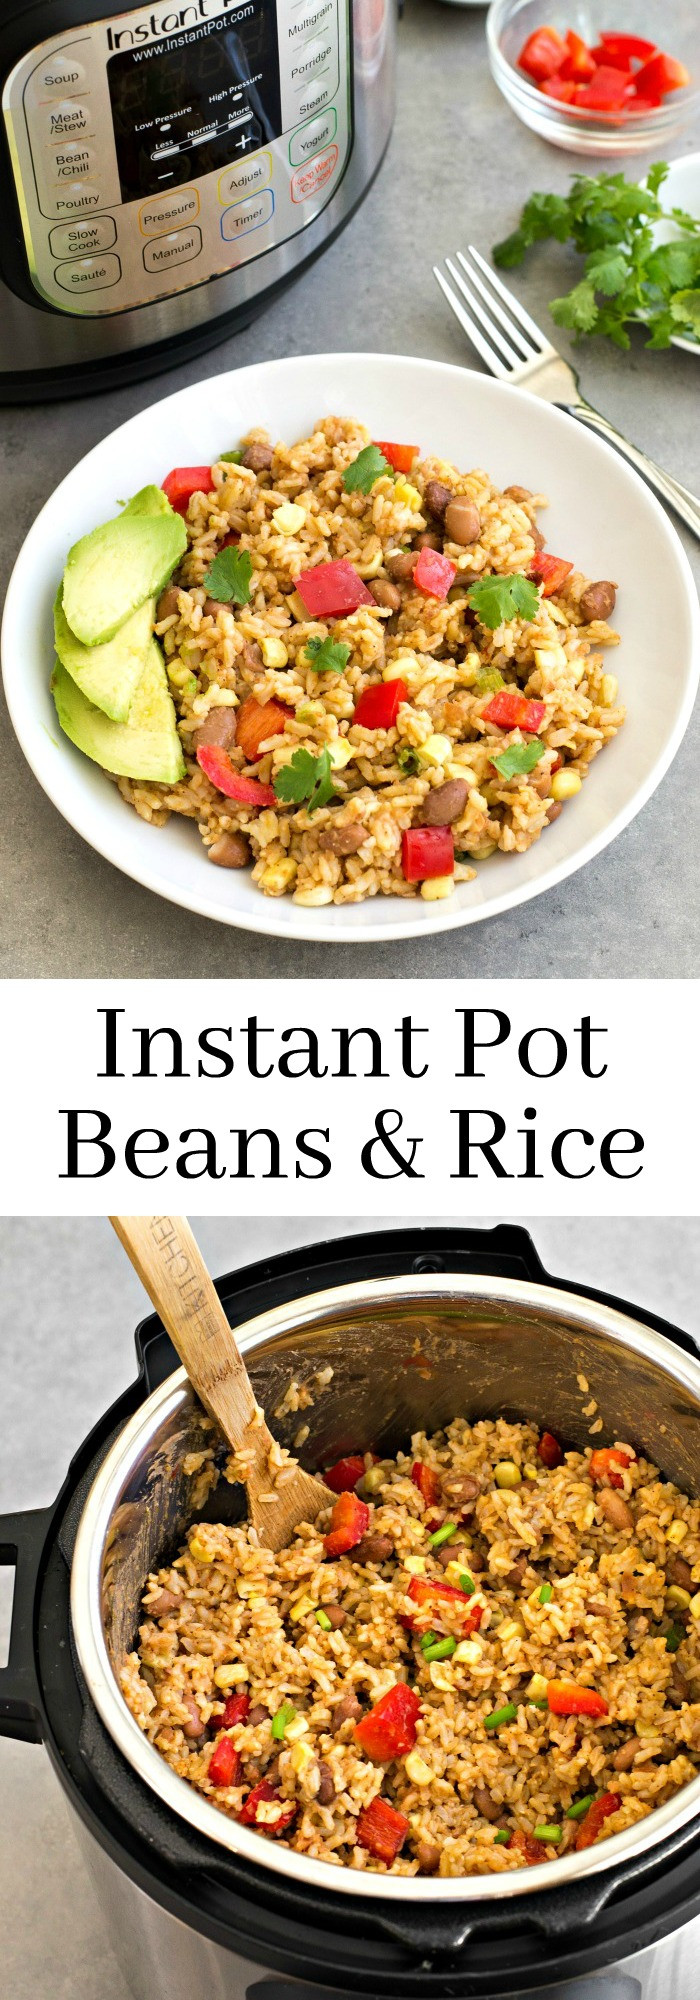 Instant Pot Pinto Beans And Rice
 Instant Pot Pinto Beans and Rice Easy Vegan Recipe